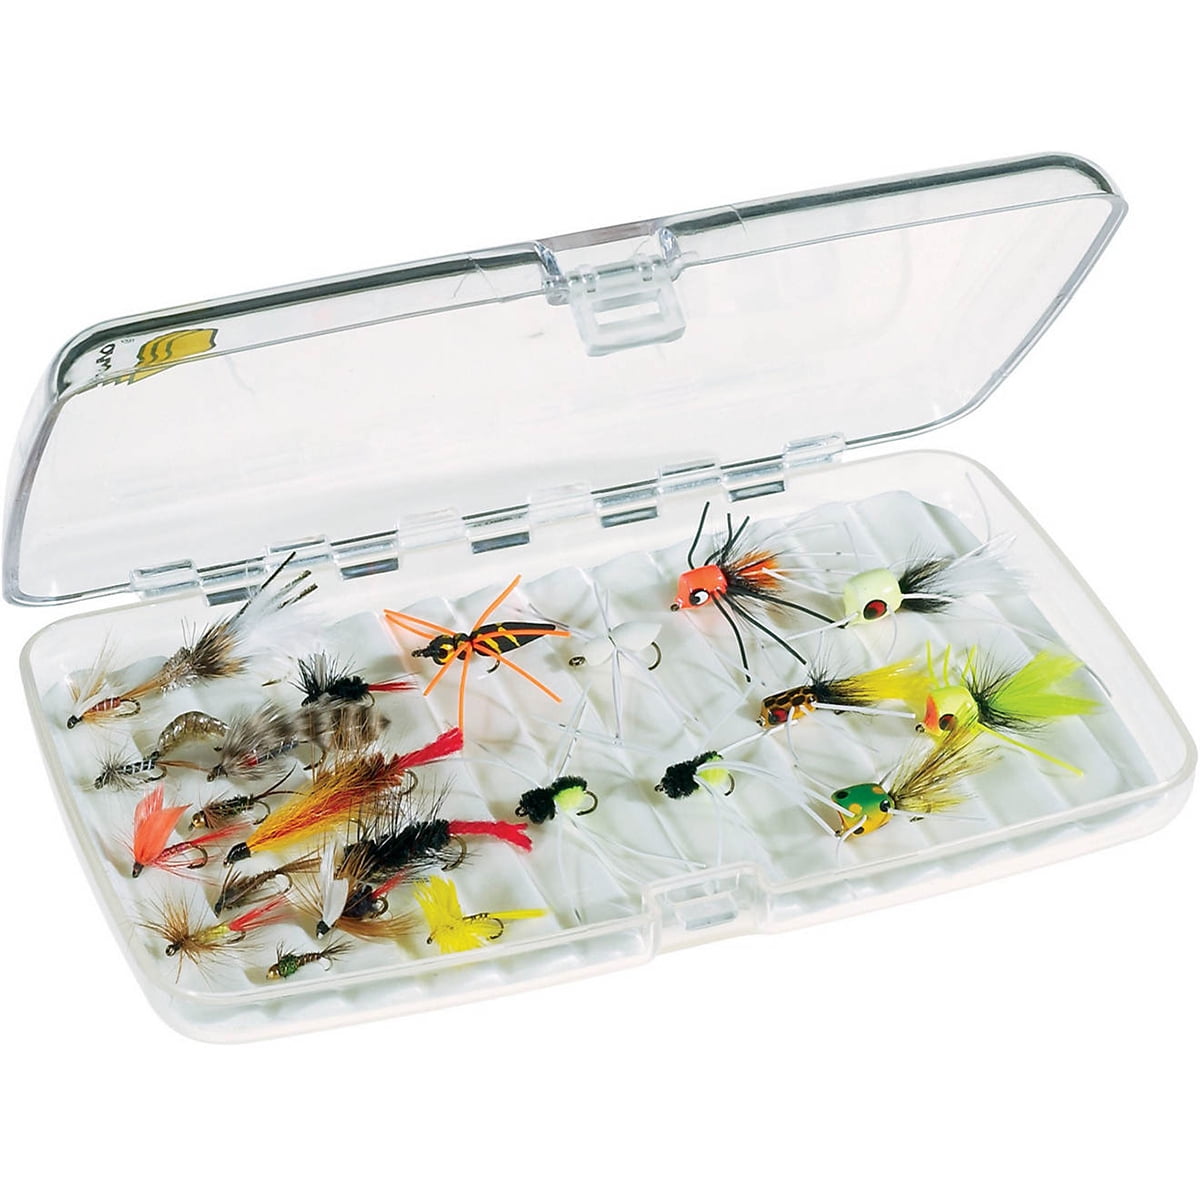 Case Box Outdoor Clear Plastic Fishing Flies Storage Tackle Durable Sale New 